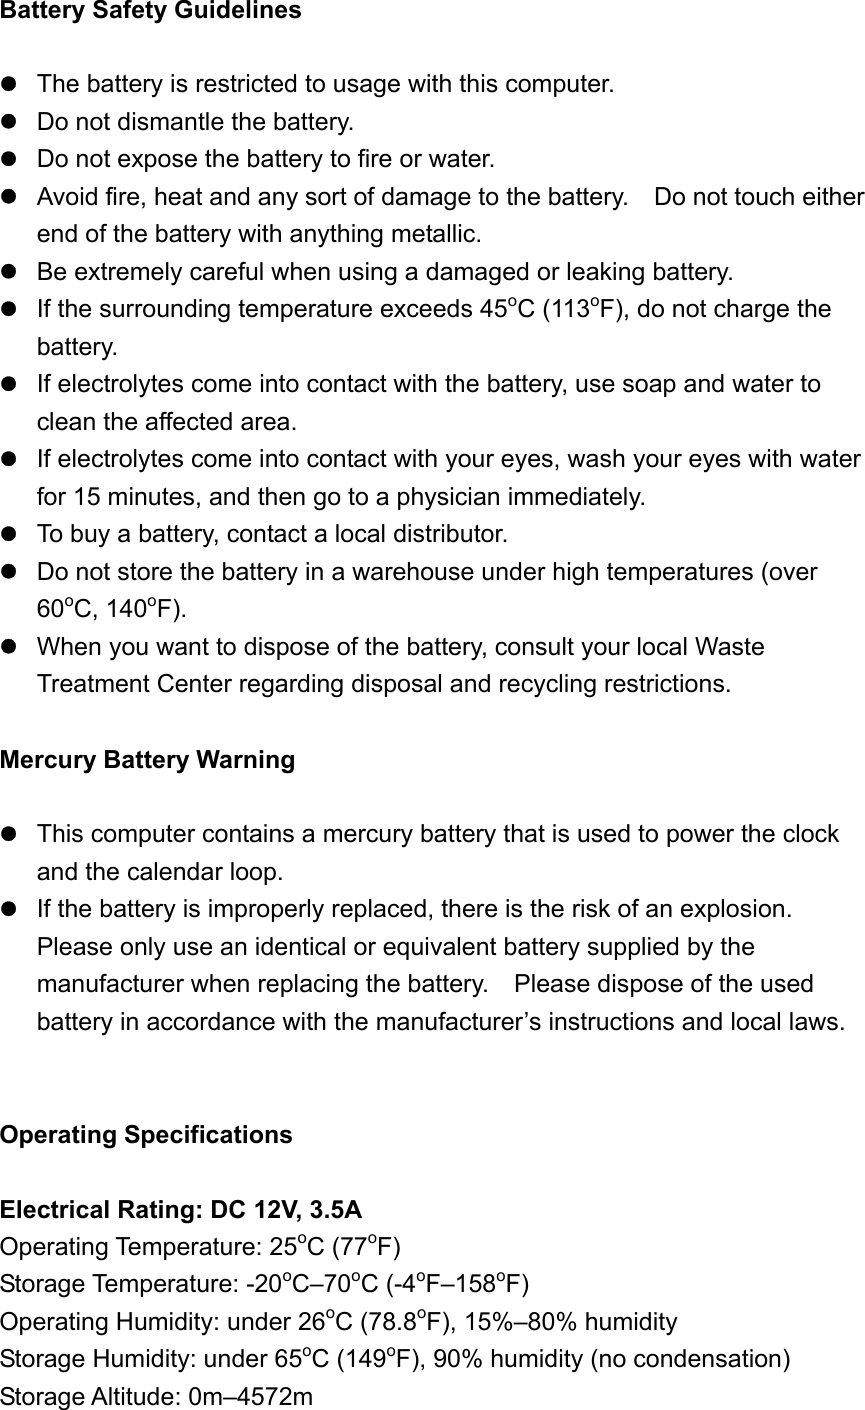 Battery Safety Guidelines   The battery is restricted to usage with this computer.  Do not dismantle the battery.  Do not expose the battery to fire or water.  Avoid fire, heat and any sort of damage to the battery.    Do not touch either end of the battery with anything metallic.  Be extremely careful when using a damaged or leaking battery.  If the surrounding temperature exceeds 45oC (113oF), do not charge the battery.  If electrolytes come into contact with the battery, use soap and water to clean the affected area.  If electrolytes come into contact with your eyes, wash your eyes with water for 15 minutes, and then go to a physician immediately.  To buy a battery, contact a local distributor.  Do not store the battery in a warehouse under high temperatures (over 60oC, 140oF).  When you want to dispose of the battery, consult your local Waste Treatment Center regarding disposal and recycling restrictions.  Mercury Battery Warning     This computer contains a mercury battery that is used to power the clock and the calendar loop.    If the battery is improperly replaced, there is the risk of an explosion.   Please only use an identical or equivalent battery supplied by the manufacturer when replacing the battery.    Please dispose of the used battery in accordance with the manufacturer’s instructions and local laws.   Operating Specifications  Electrical Rating: DC 12V, 3.5A Operating Temperature: 25oC (77oF)  Storage Temperature: -20oC–70oC (-4oF–158oF) Operating Humidity: under 26oC (78.8oF), 15%–80% humidity Storage Humidity: under 65oC (149oF), 90% humidity (no condensation) Storage Altitude: 0m–4572m 